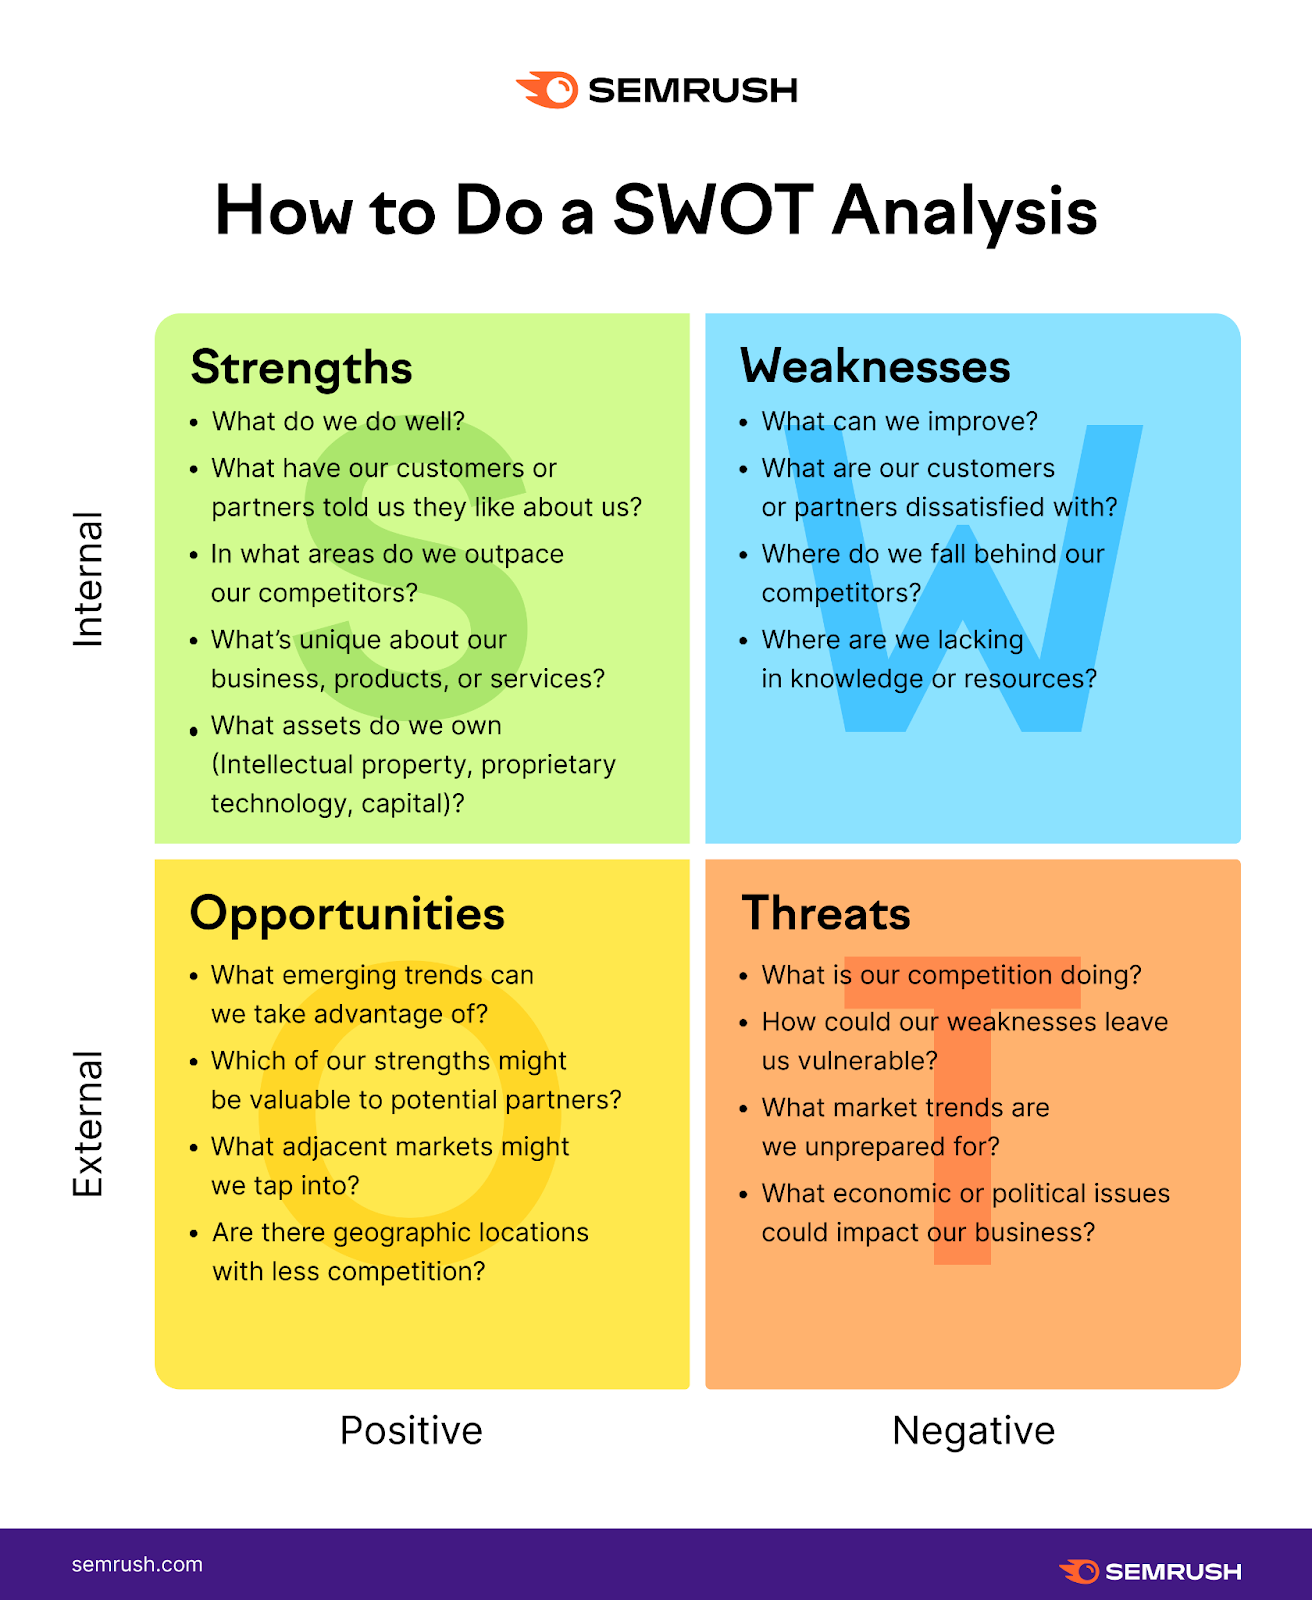 How to do a SWOT analysis infographic